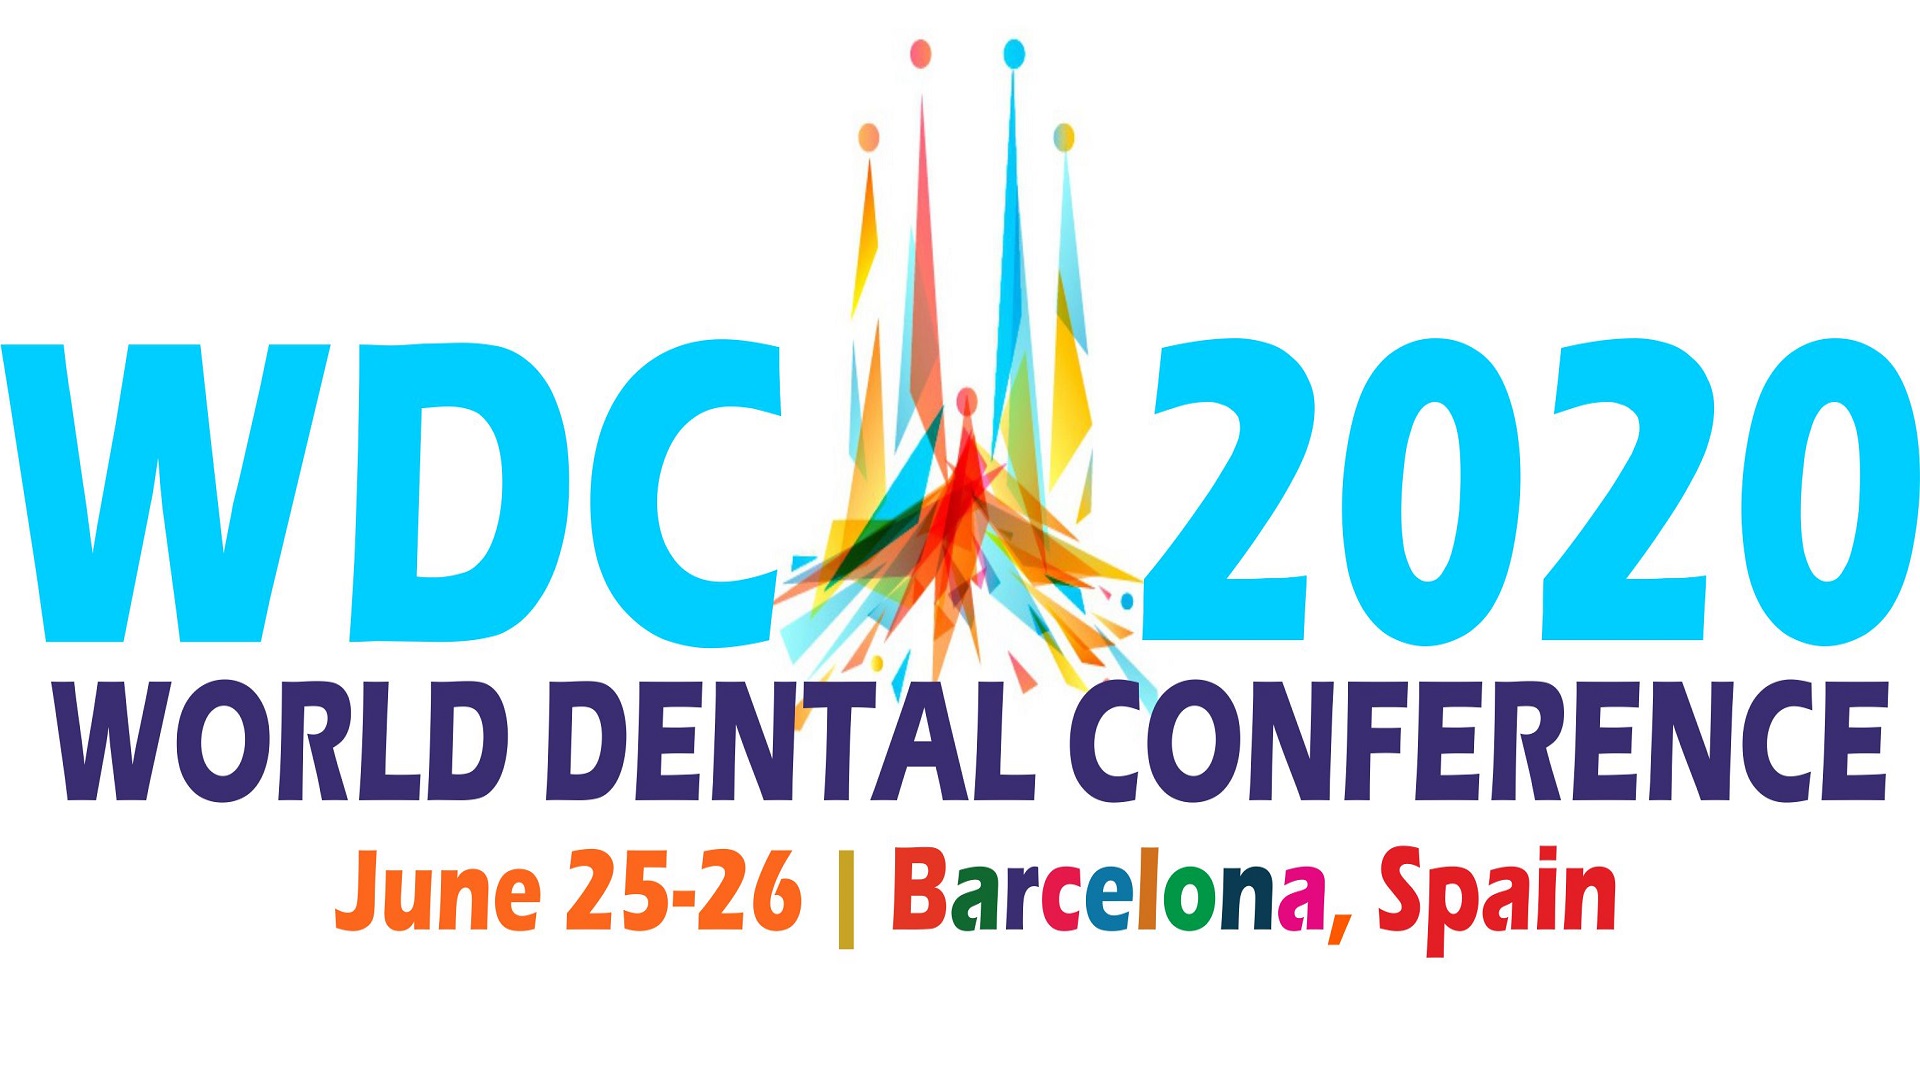 4th World Dental Conference